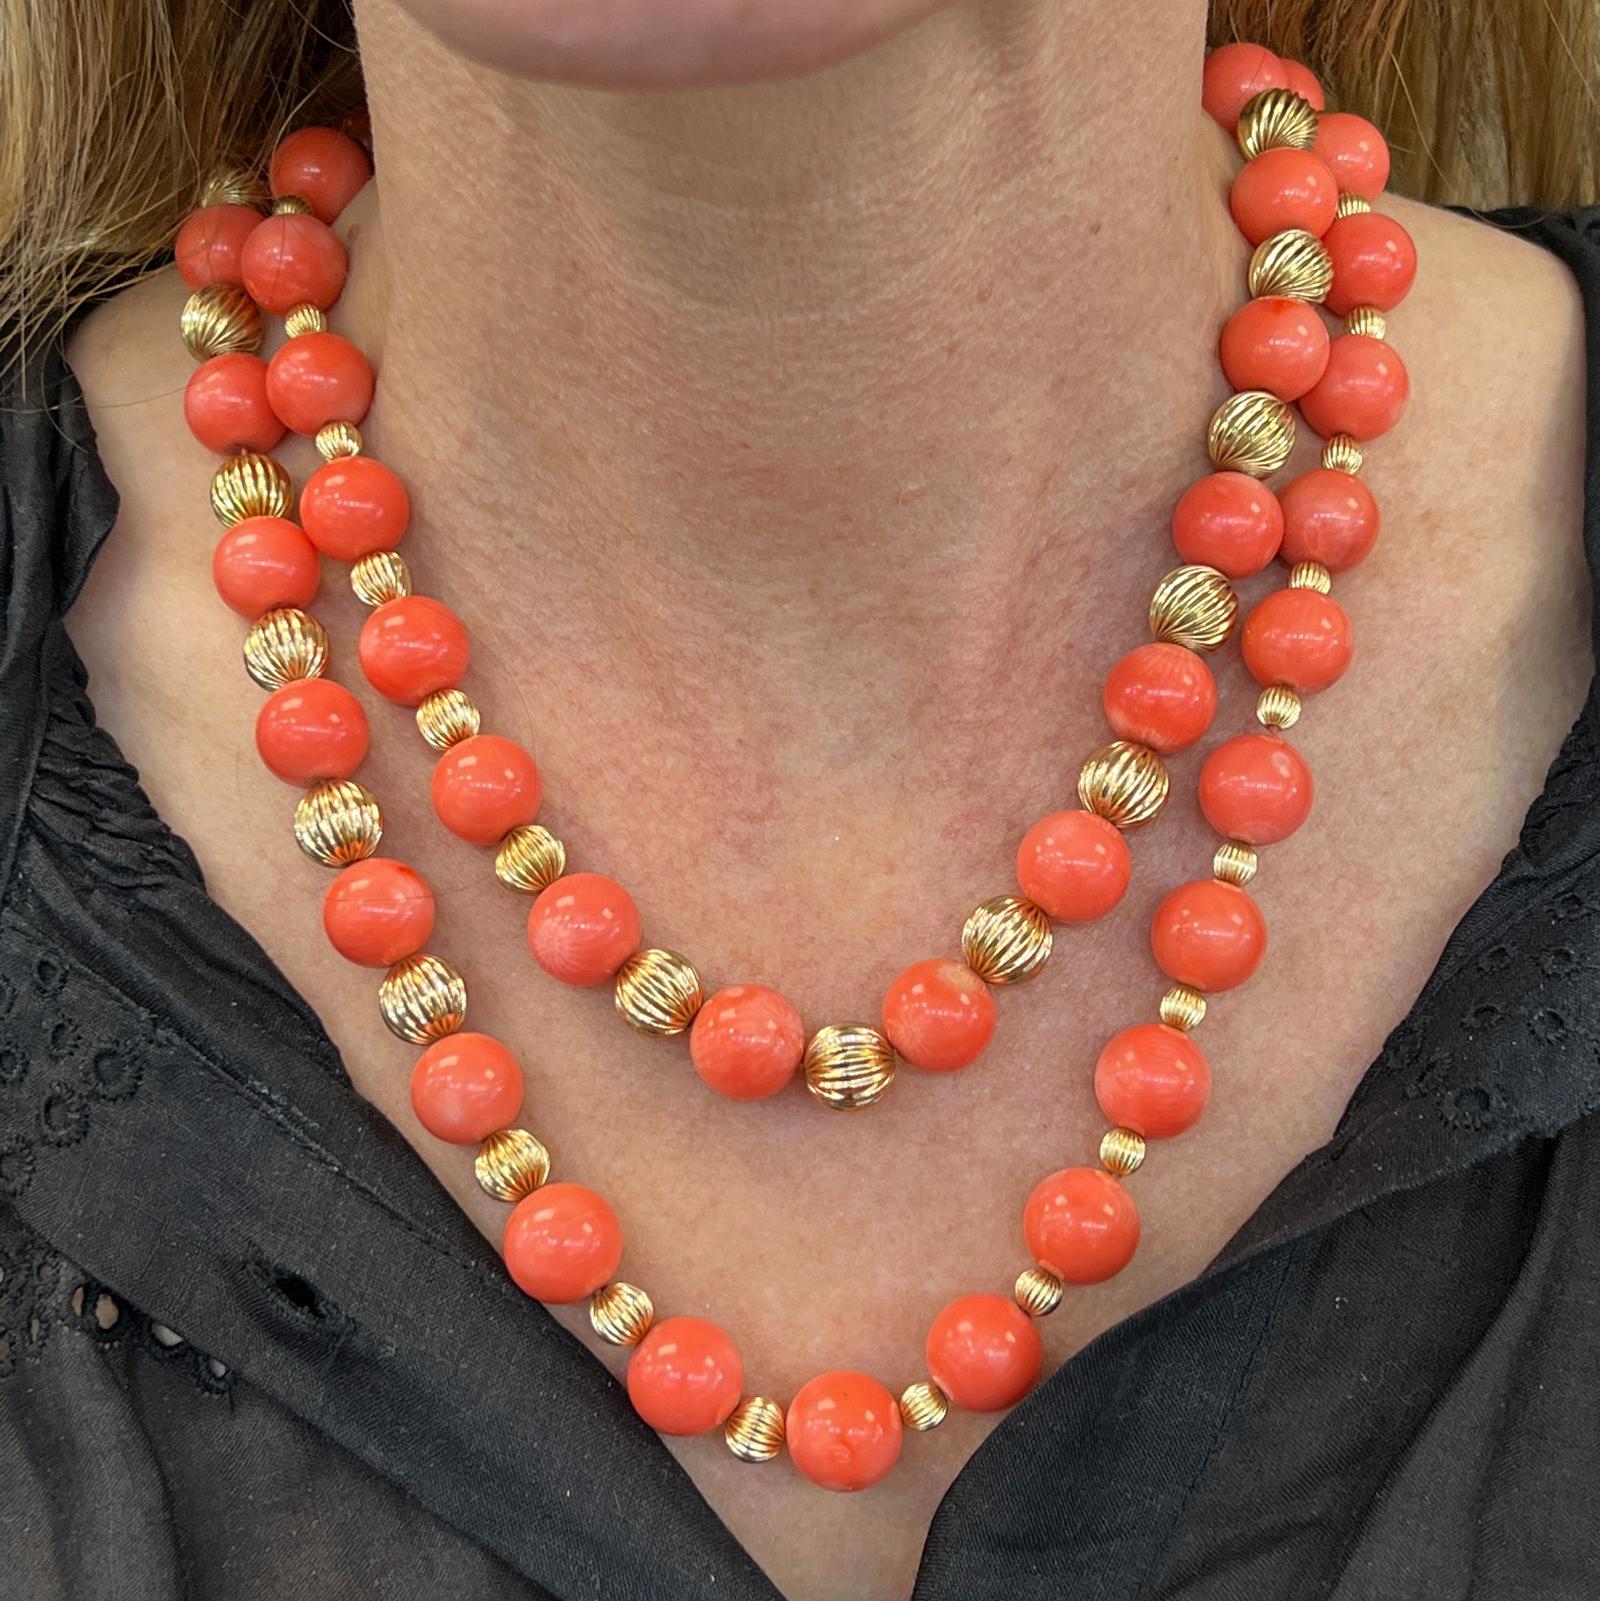 Rare large coral bead estate necklace designed by Tiffany & Company. The necklace features natural coral beads measuring 12.5mm in size, and ribbed 14 karat yellow gold balls. The X clasp is a Tiffany hallmark, and the necklace measures 40 inches in